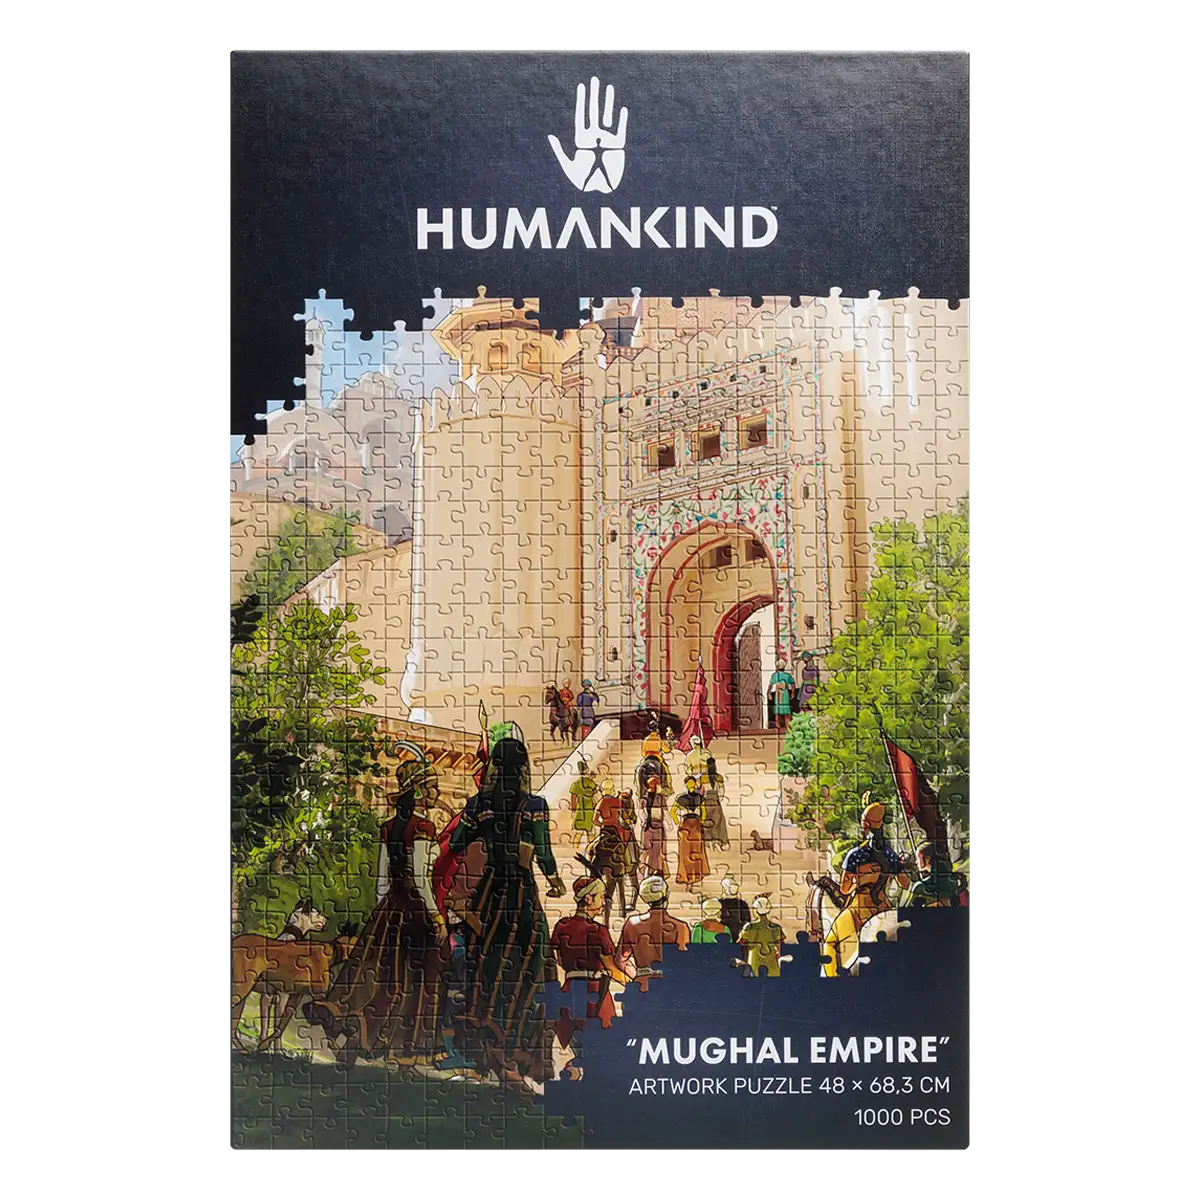 Humankind Puzzle "Mughal Empire" Image 2